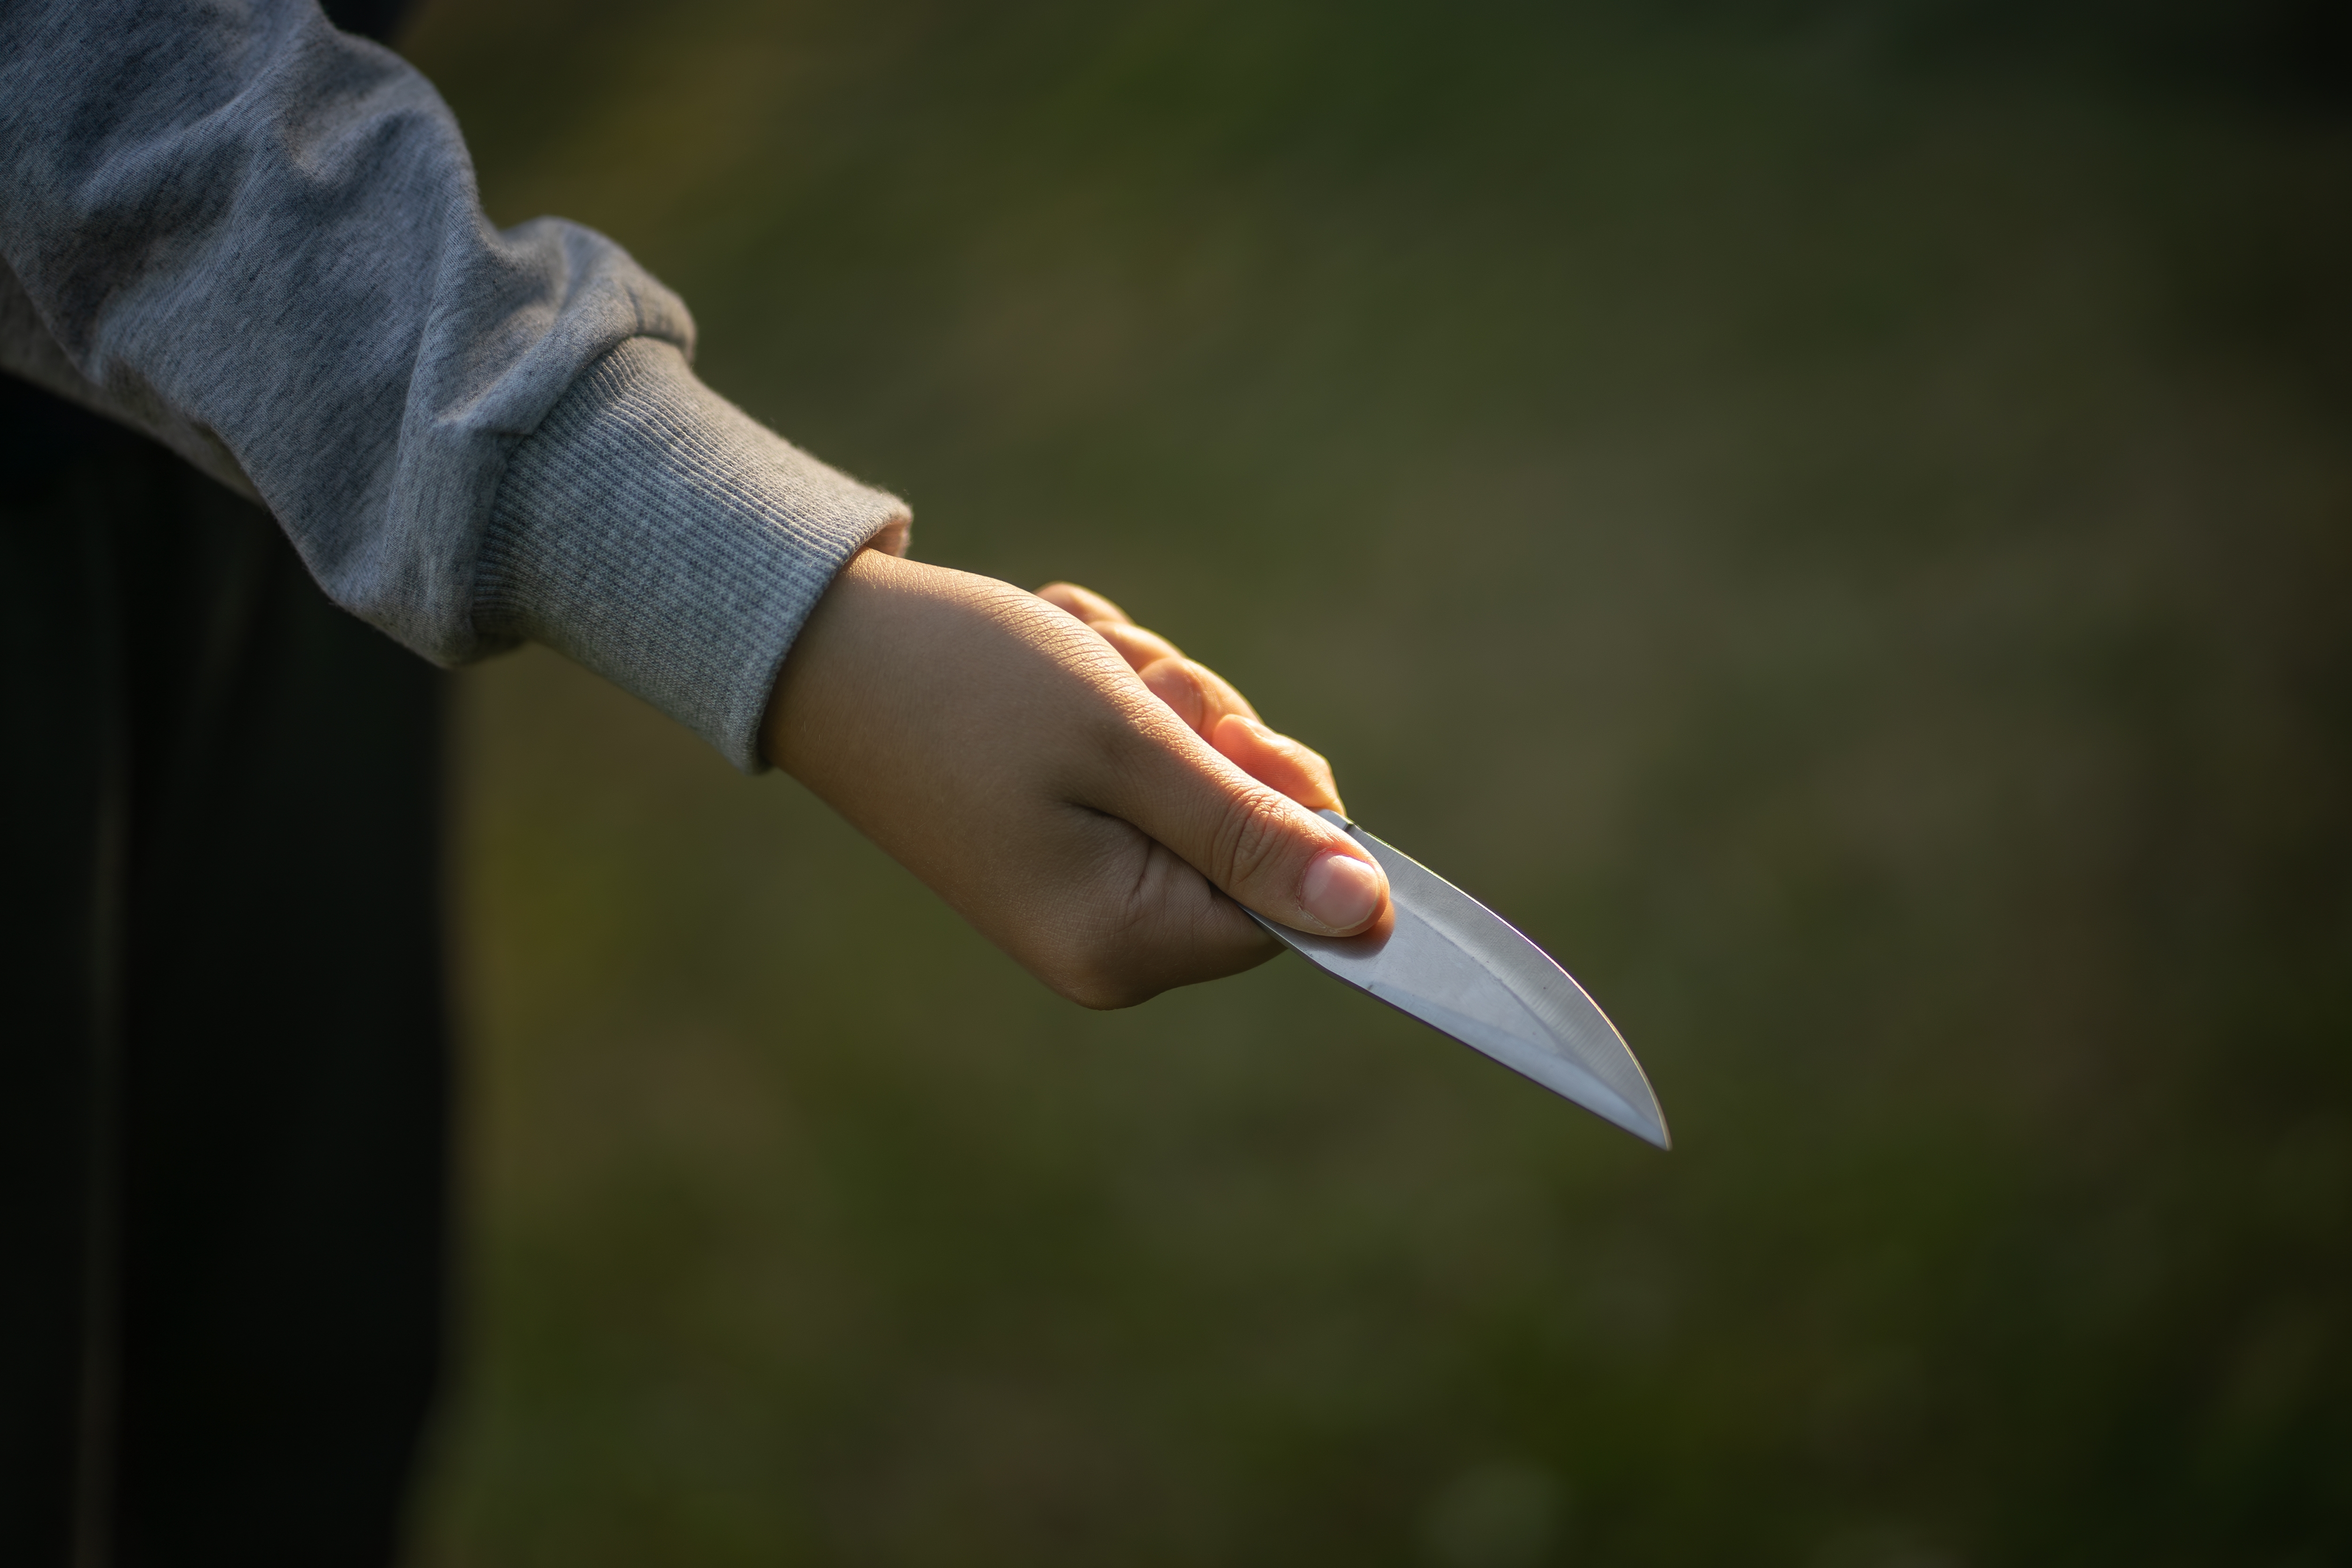 A child's hand with a sharp knife | Source: Shutterstock.com